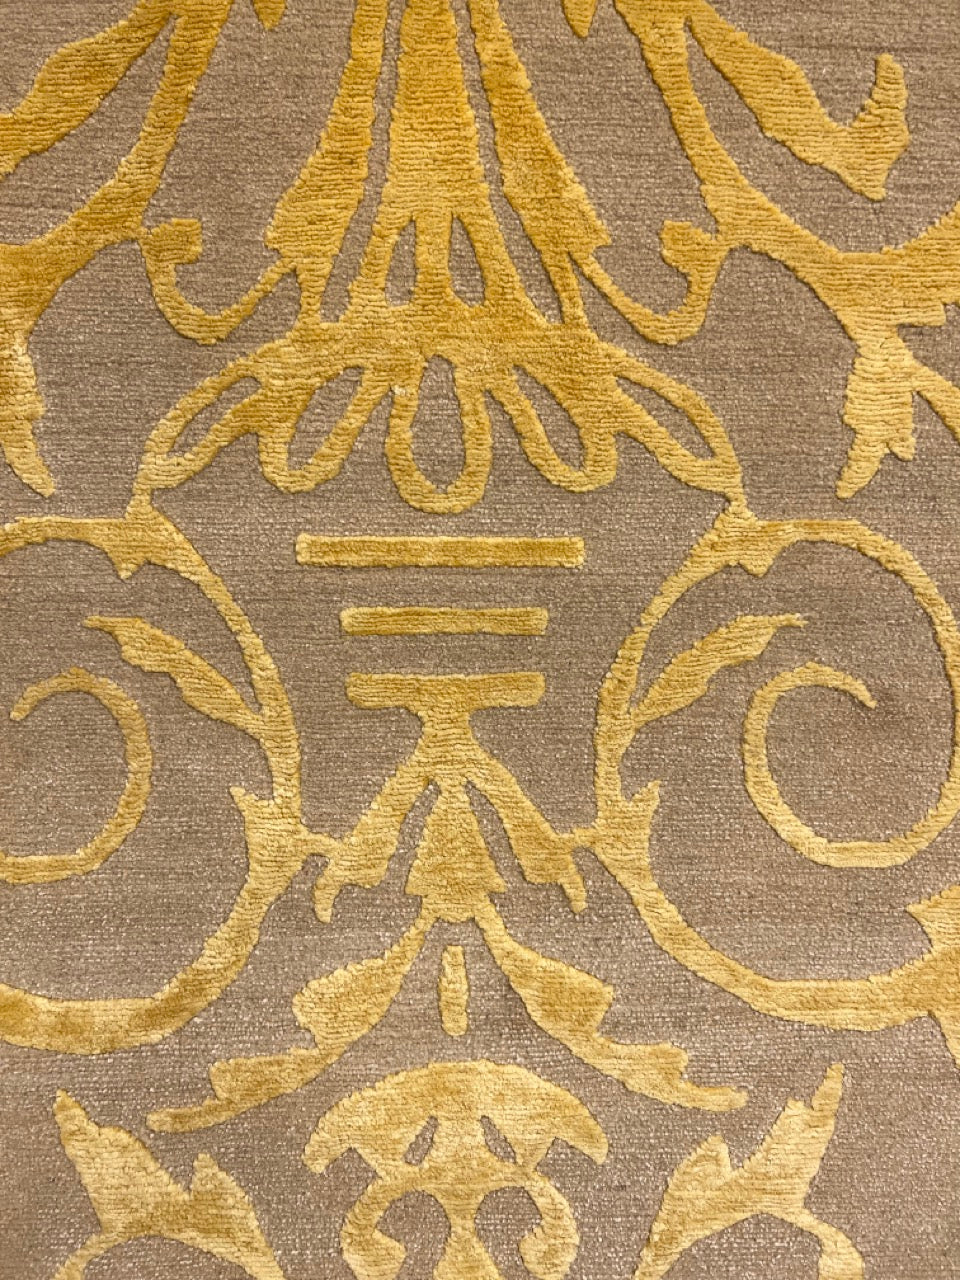 Fine Hand -Knotted Modern Nepal Wool & Silk Carpet product image #27556154441898